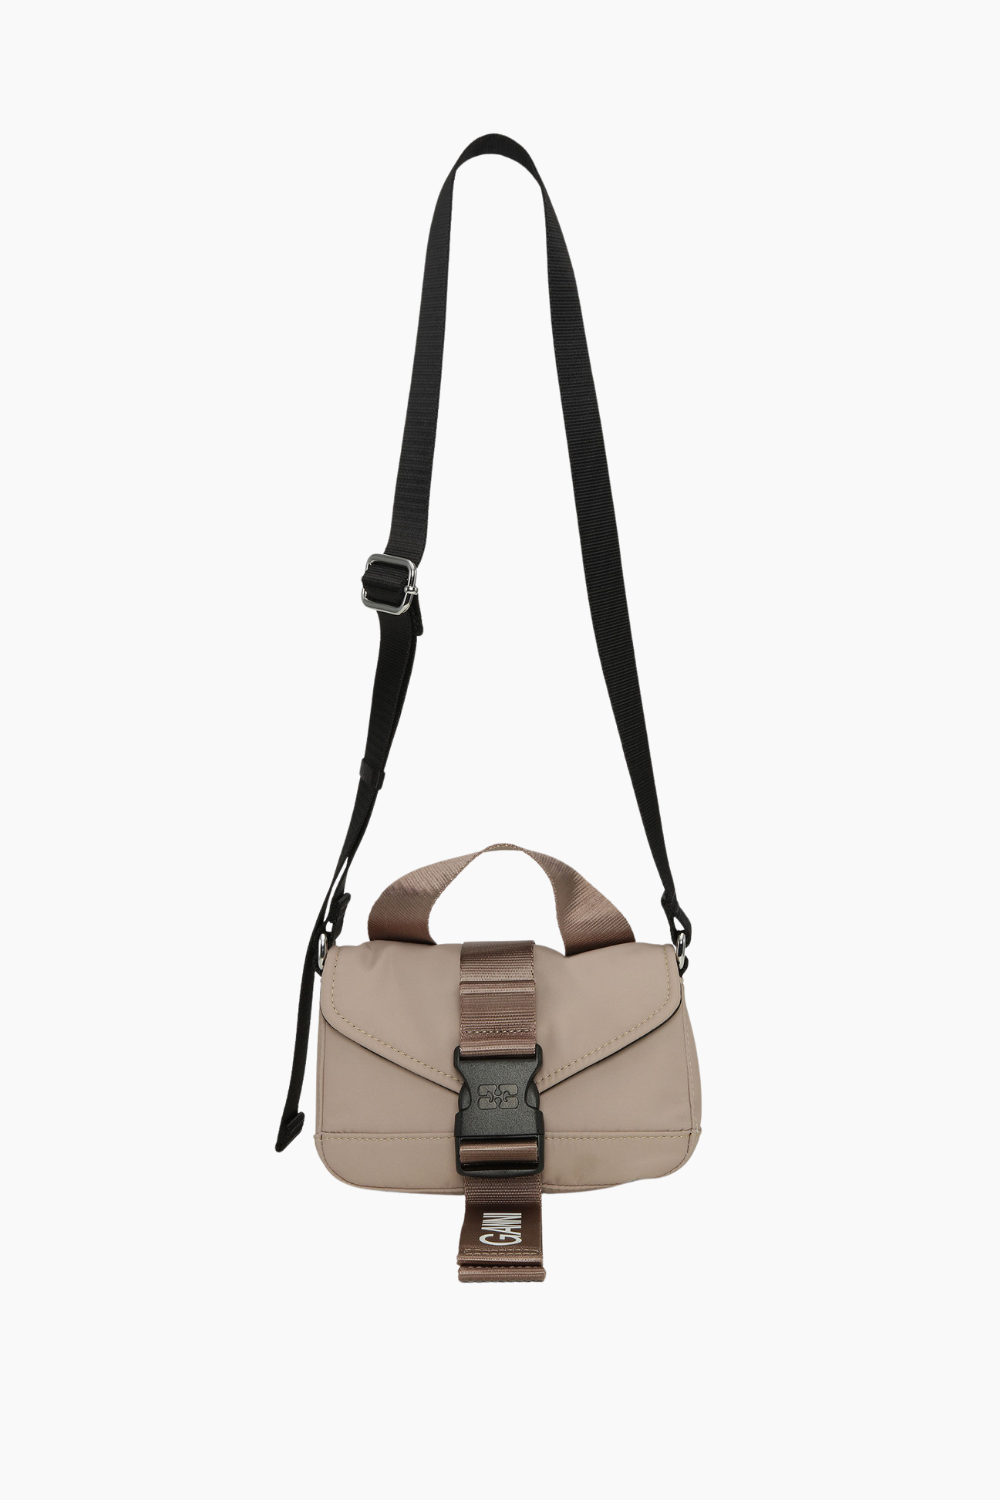 Recycled Tech Mini Satchel A5704 - Oyster Gray - GANNI